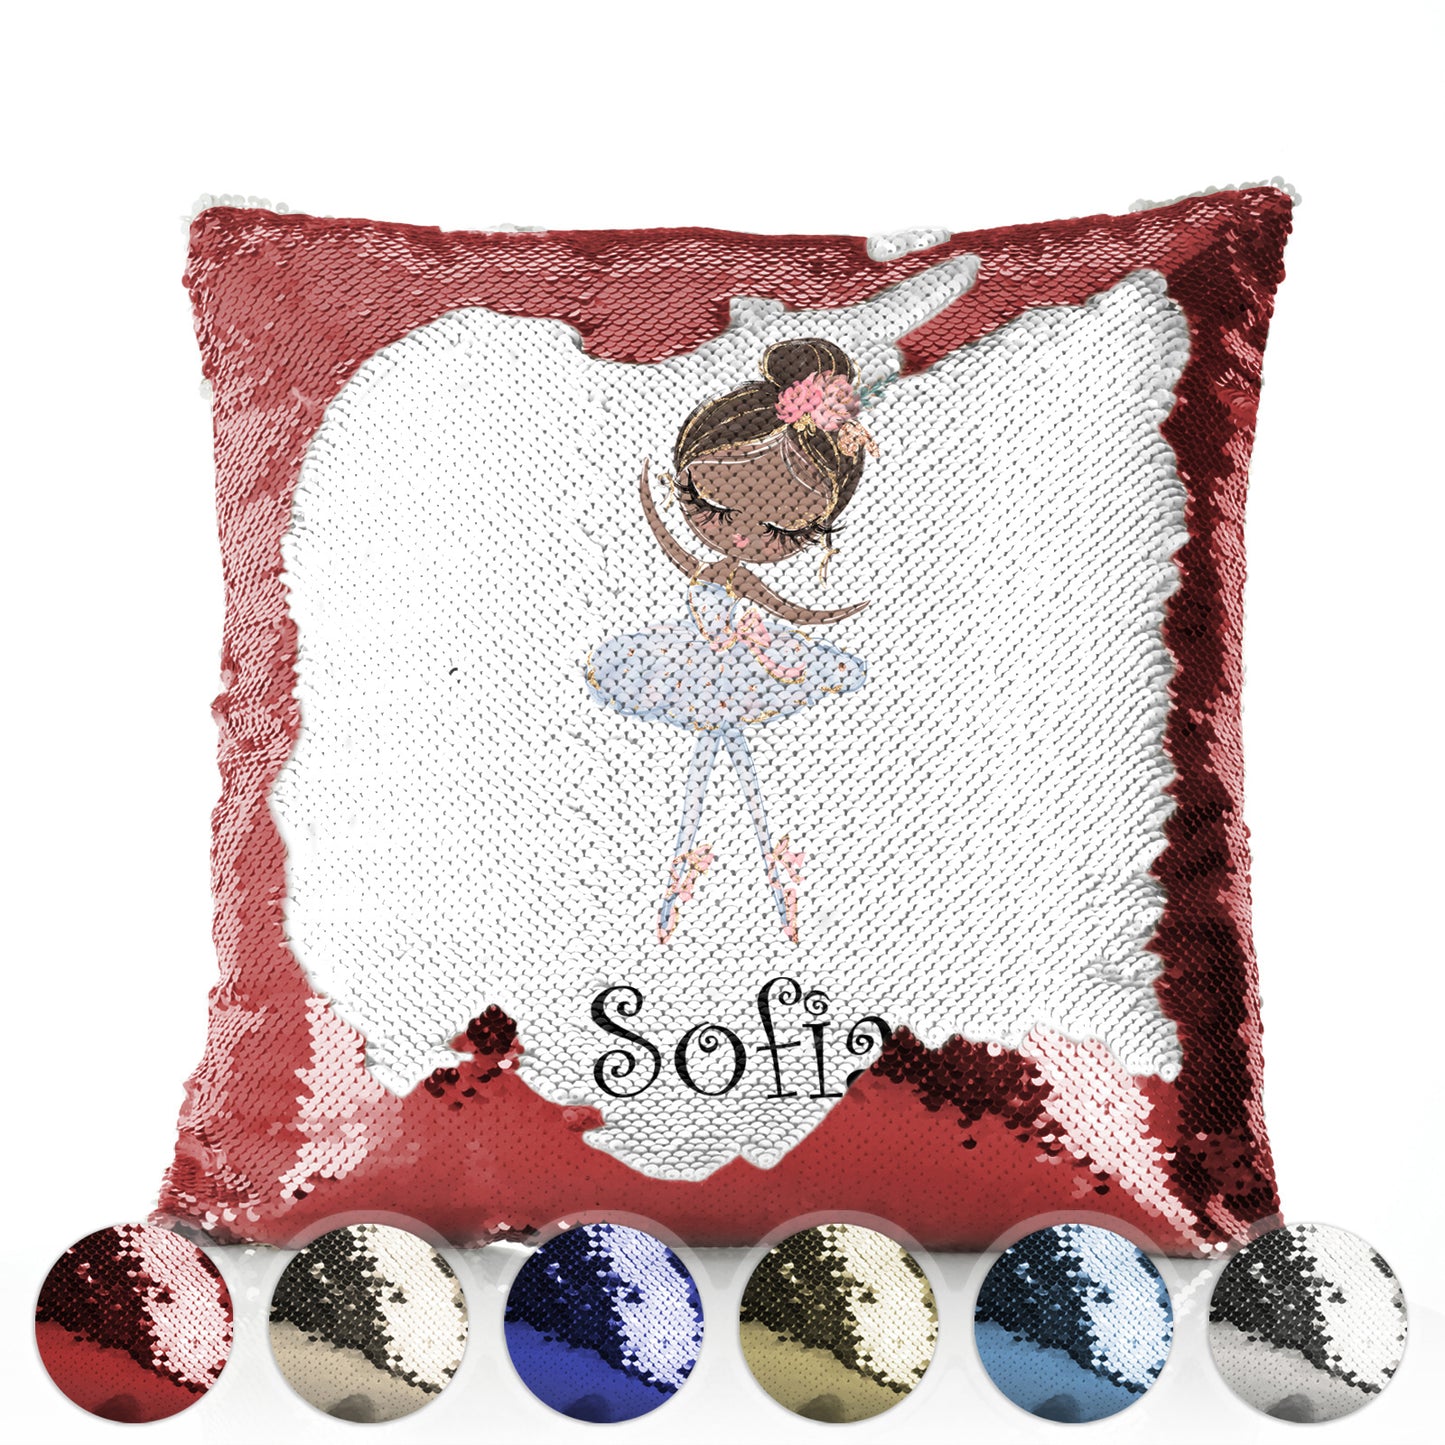 Personalised Sequin Cushion with Cute Text and Black Hair White Dress Ballerina